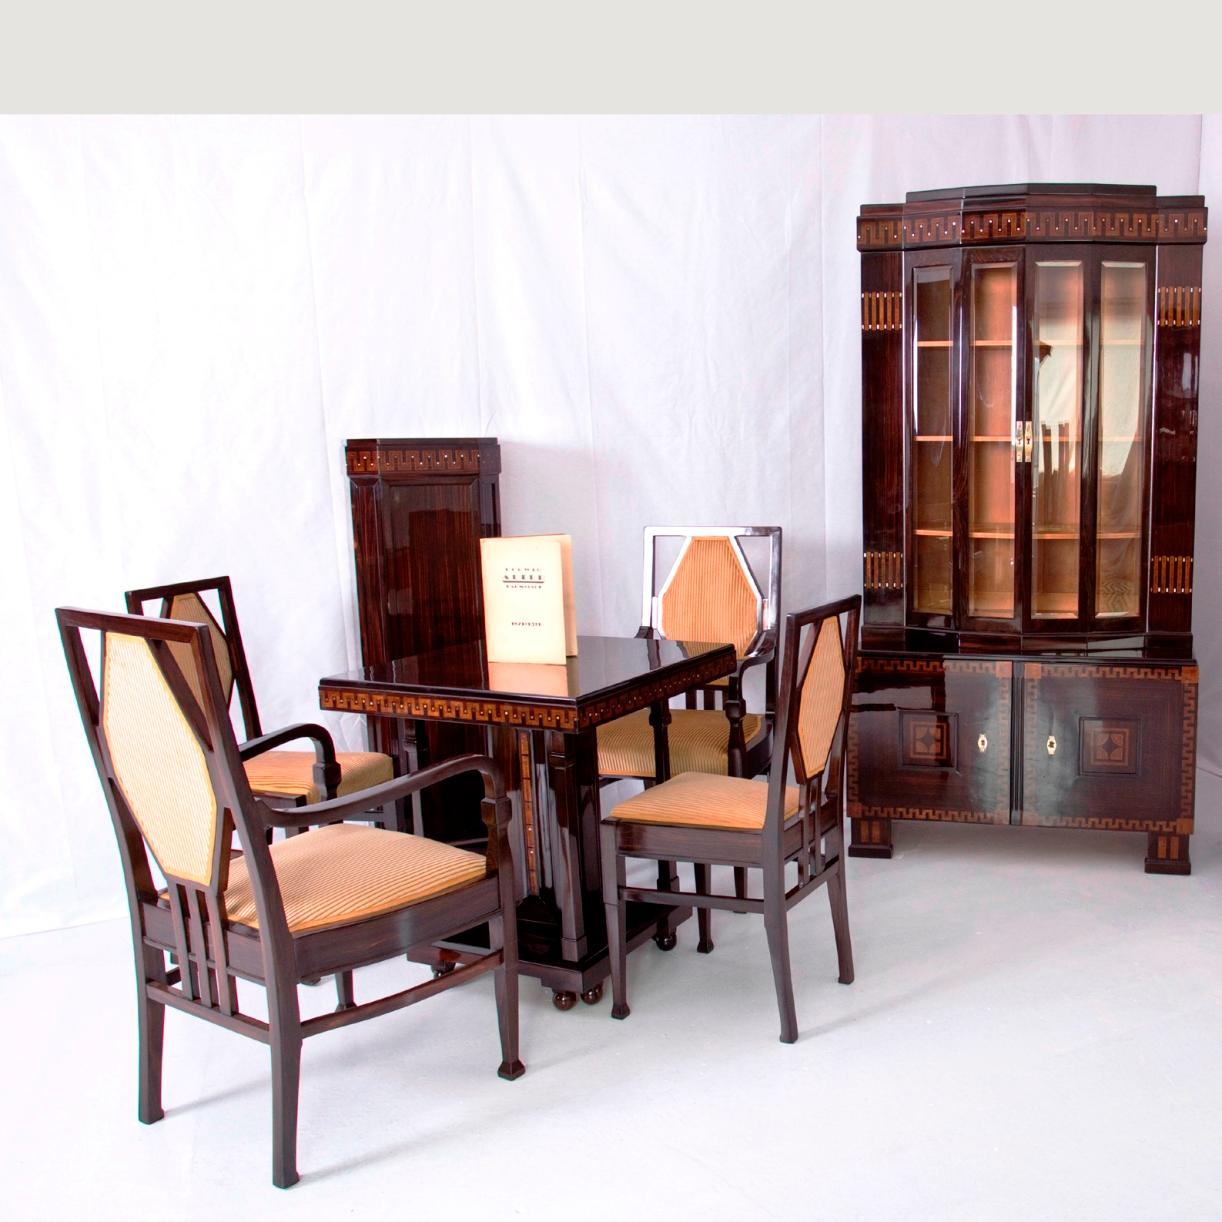 Important Living Room Set by Ludwig Alter Darmstadt Jugendstil, 1908' In Excellent Condition For Sale In Rome, IT